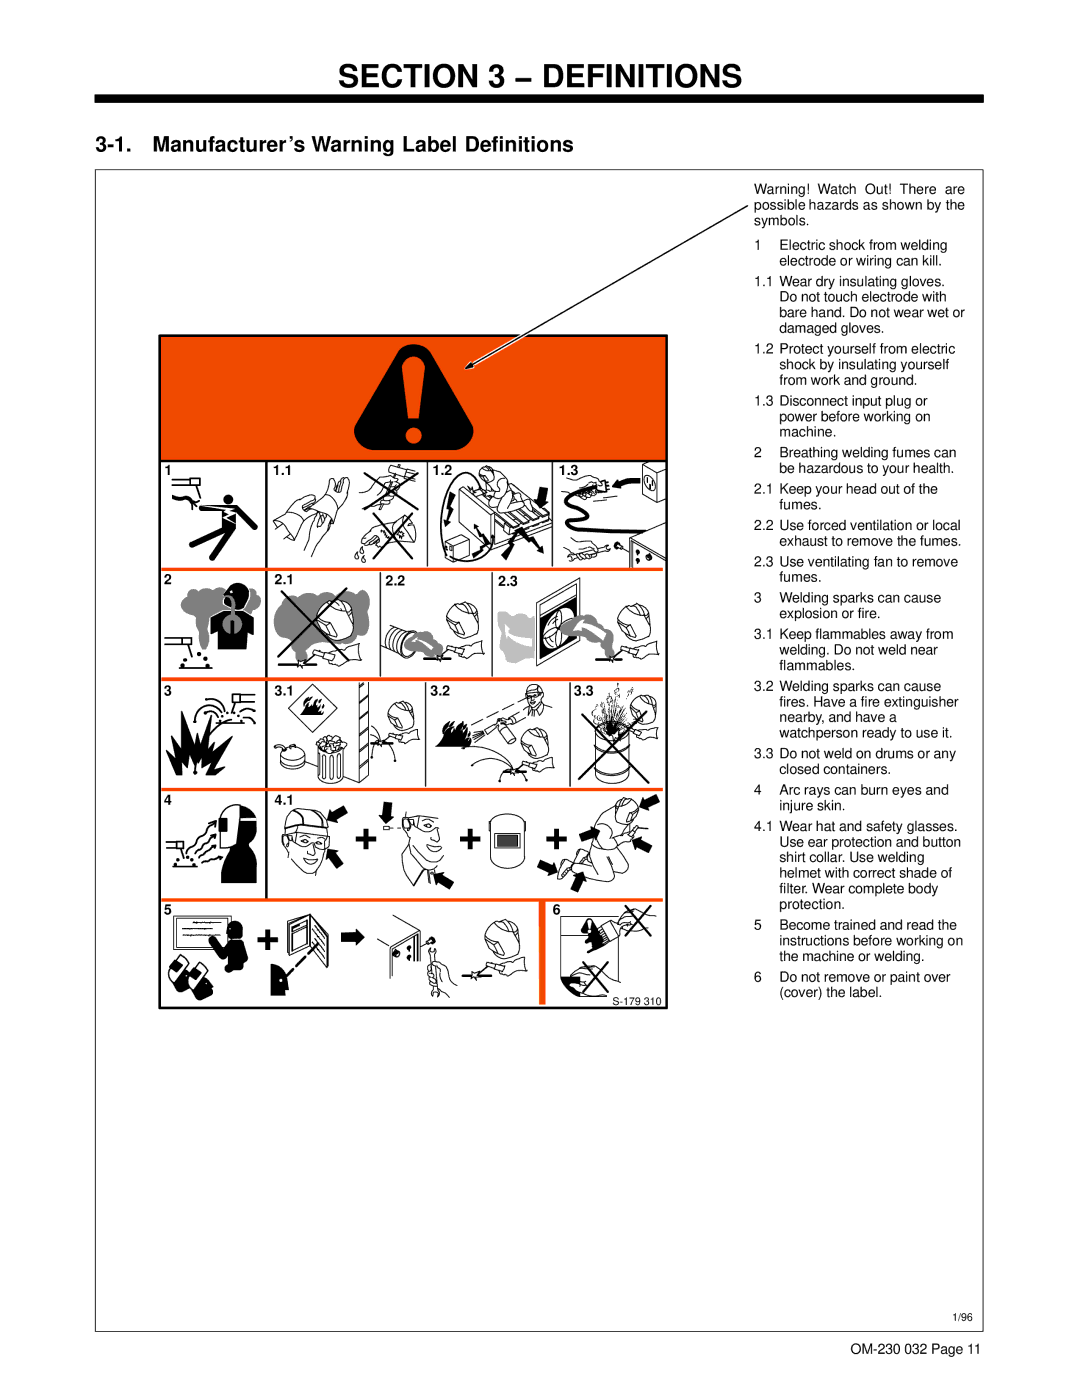 Miller Electric Axcess 300 manual Manufacturer’s Warning Label Definitions, Keep your head out of the fumes 